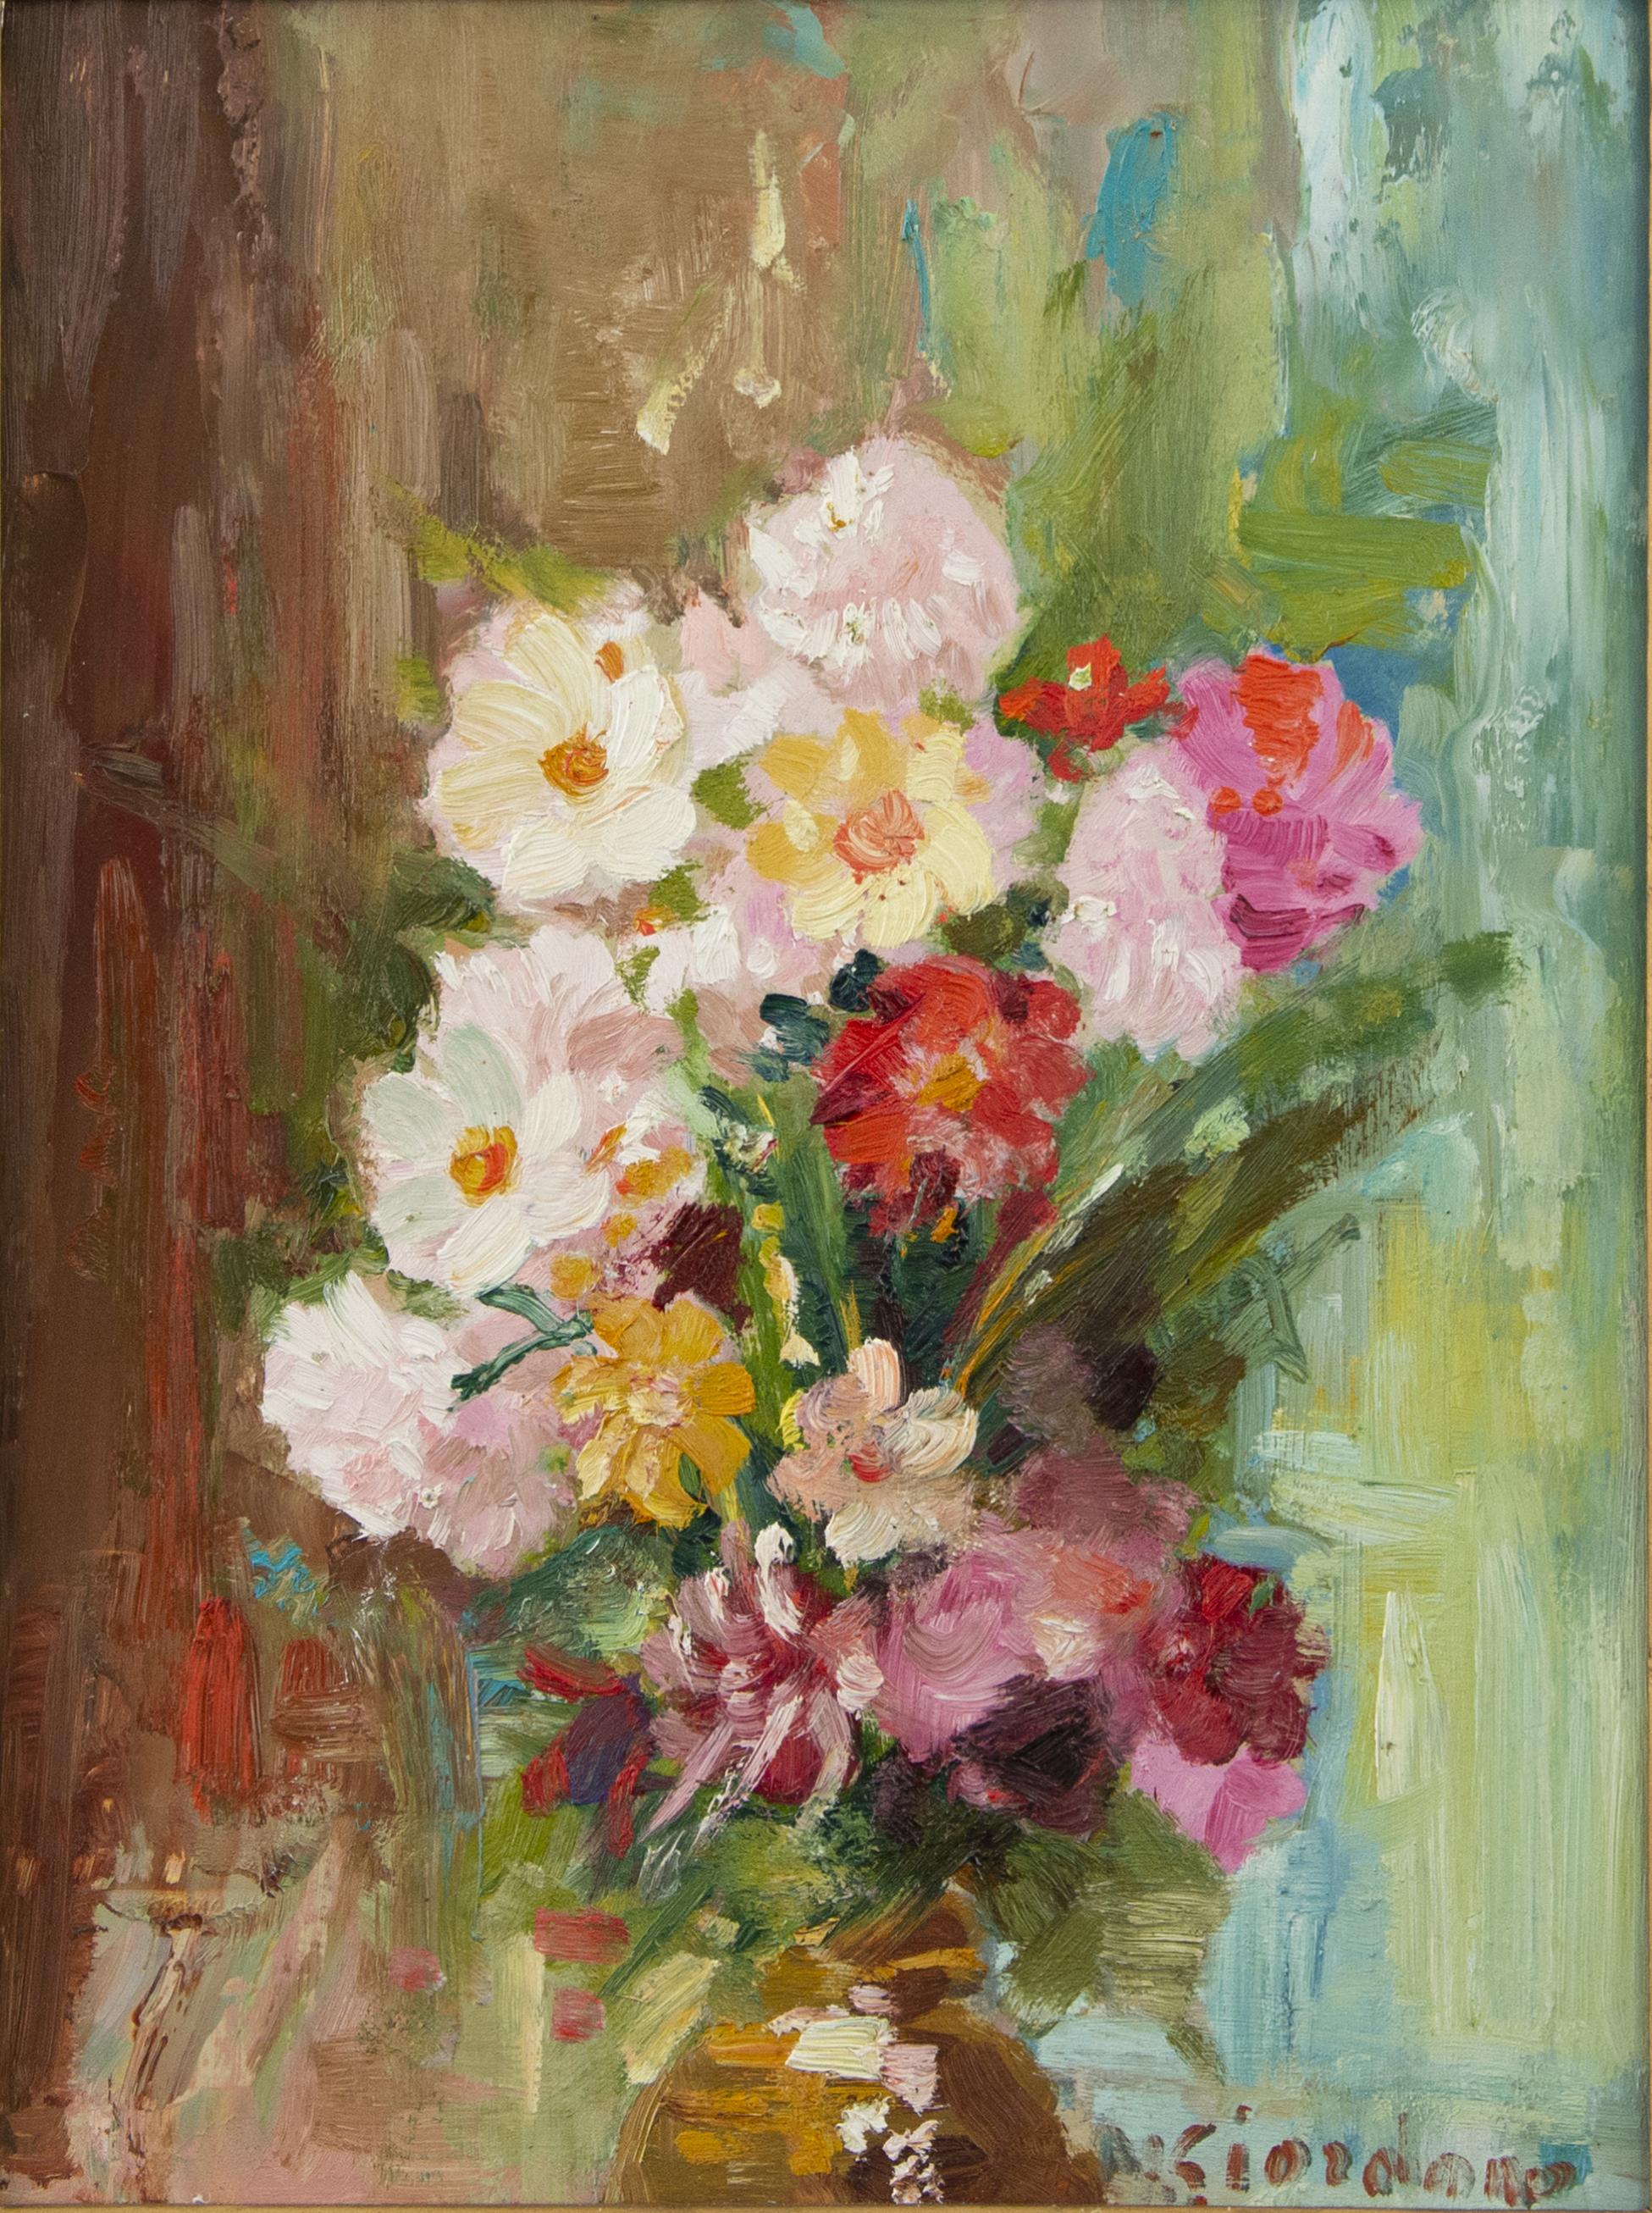 Explosion of Flowers - Oil on Panel by Italian Artist Early 20th Century